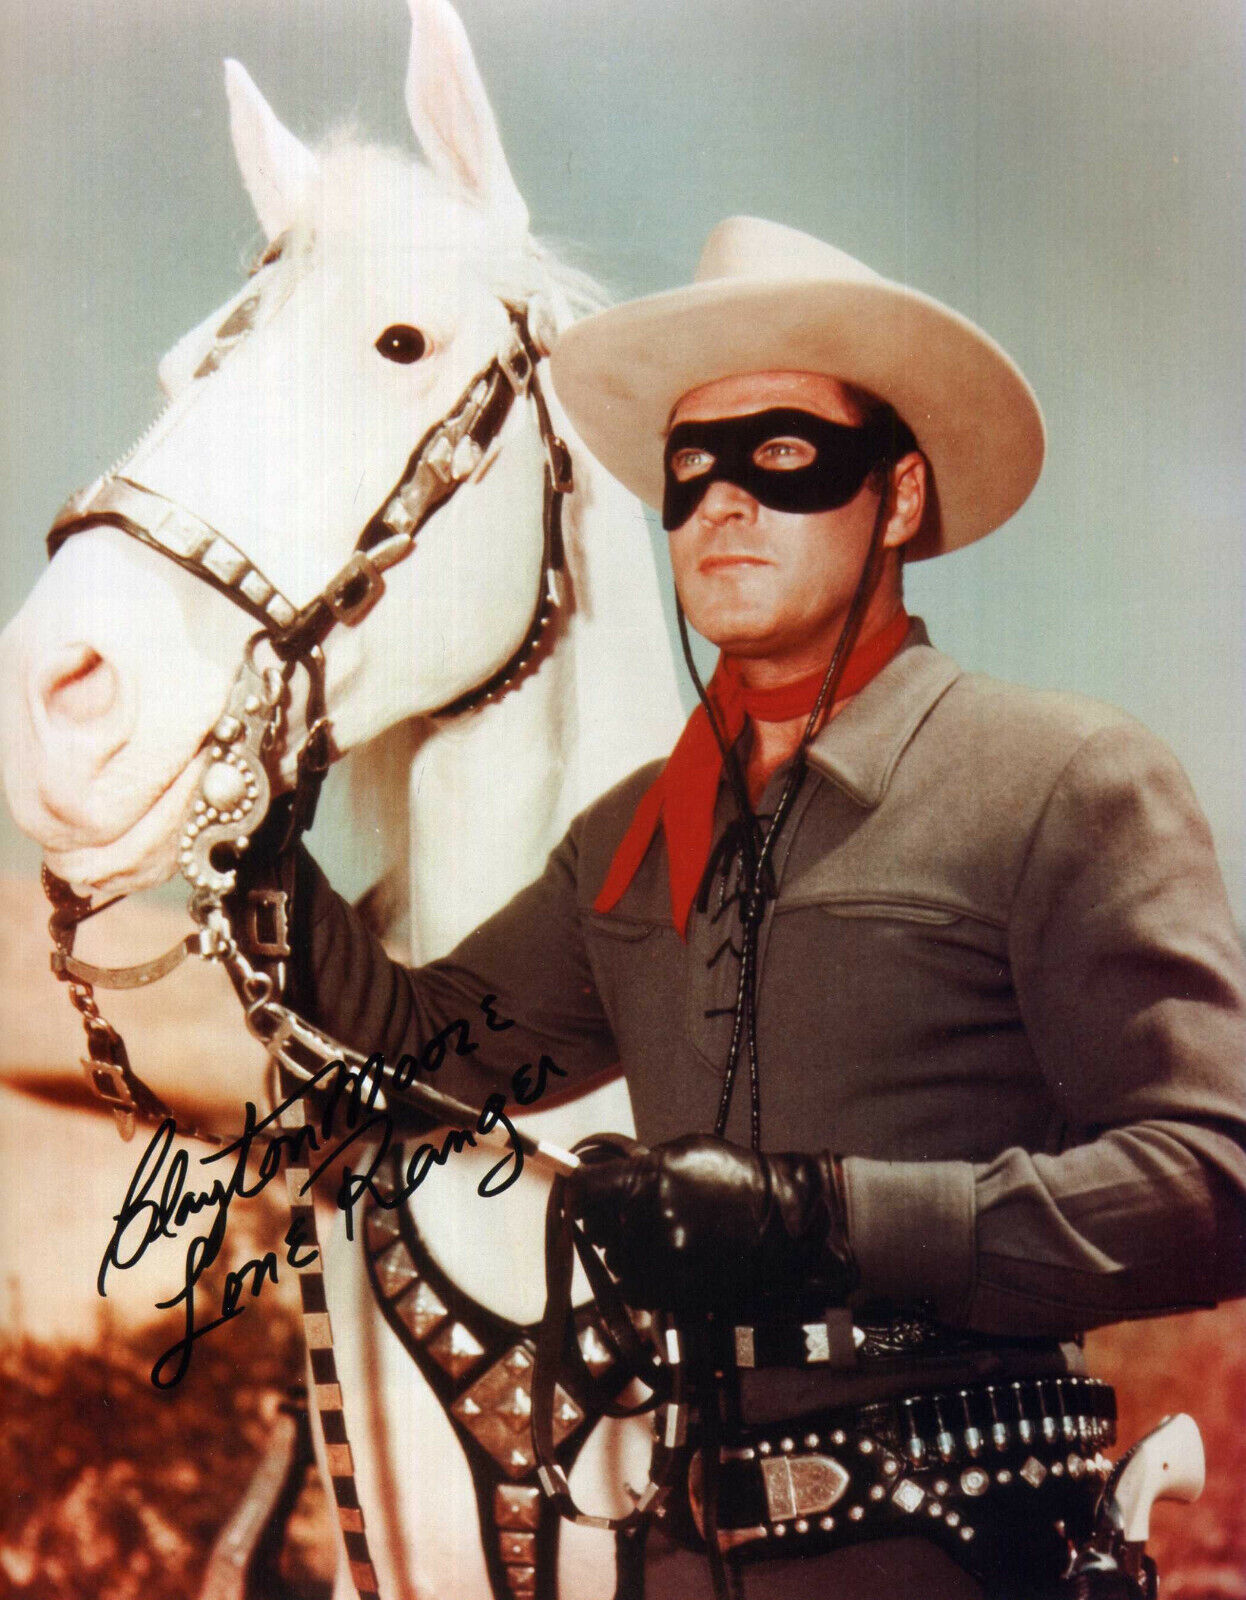 CLAYTON MOORE Signed Photo Poster paintinggraph - Film & TV Actor - The Lone Ranger - Preprint